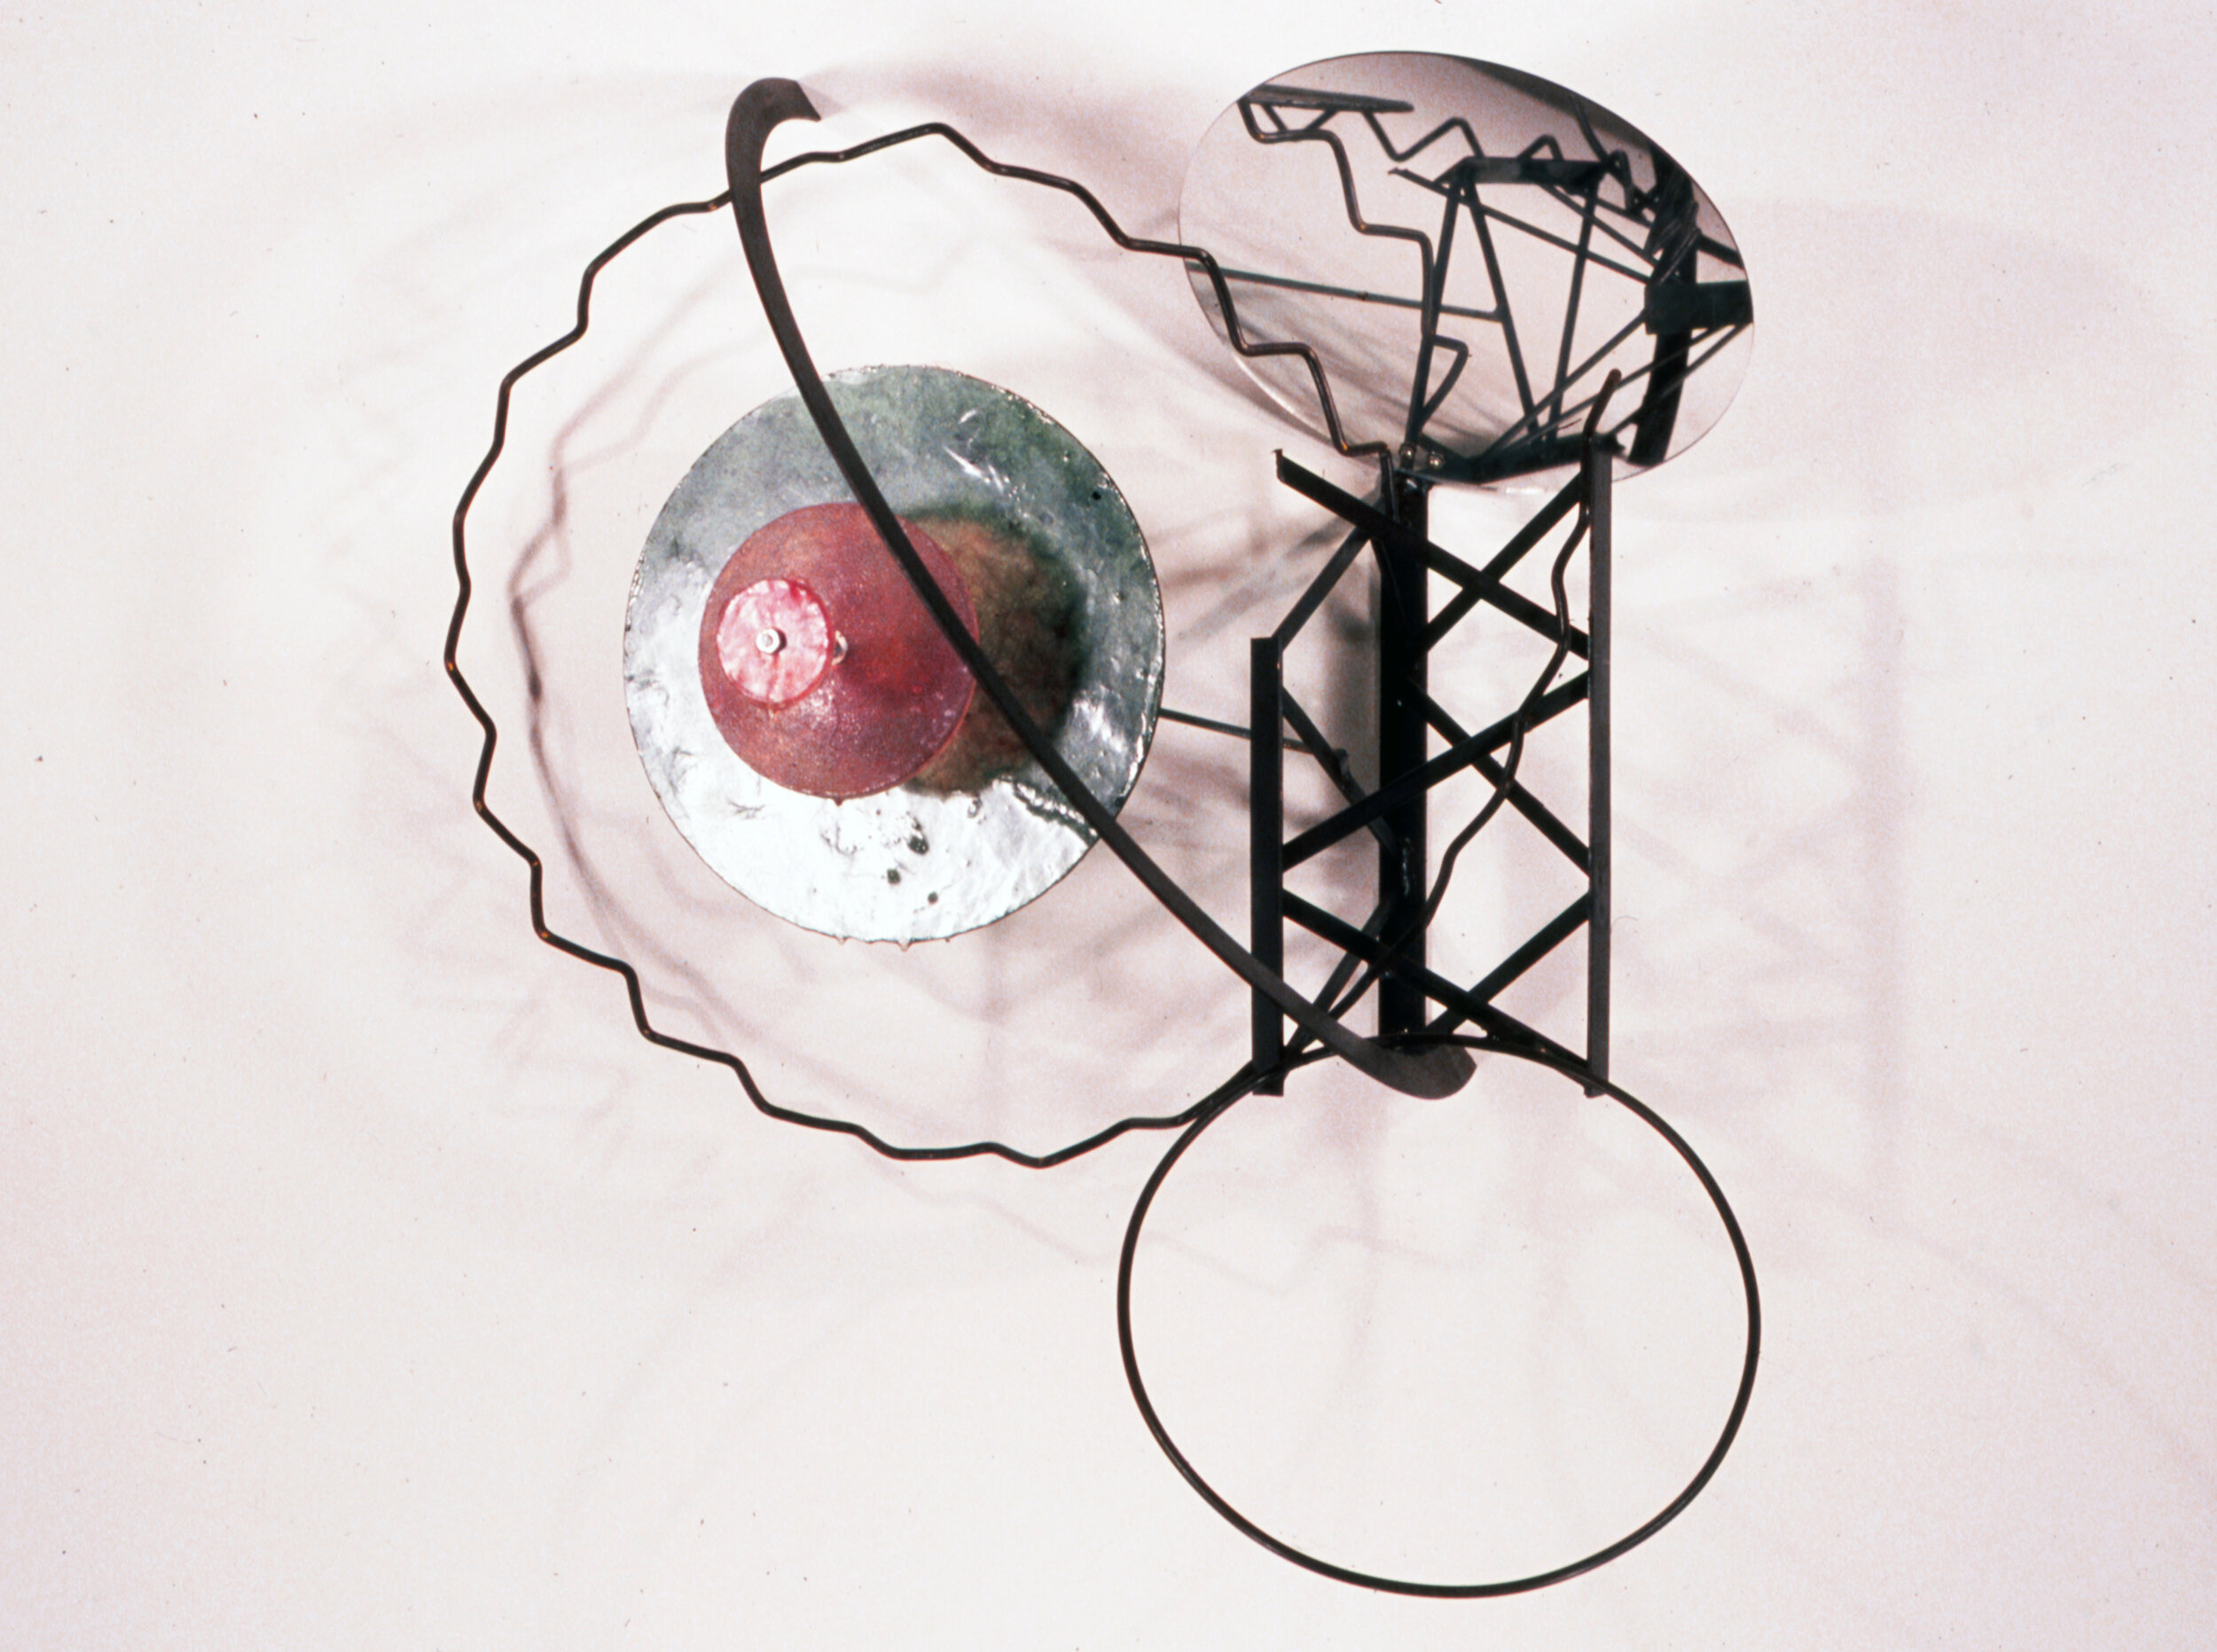  Discs and Hoops (1999), steel, fiberglass, pigmented resin, and plexiglass, 30 x 28 x 14 inches (76.2 x 71.1 x 35.5 cm) 